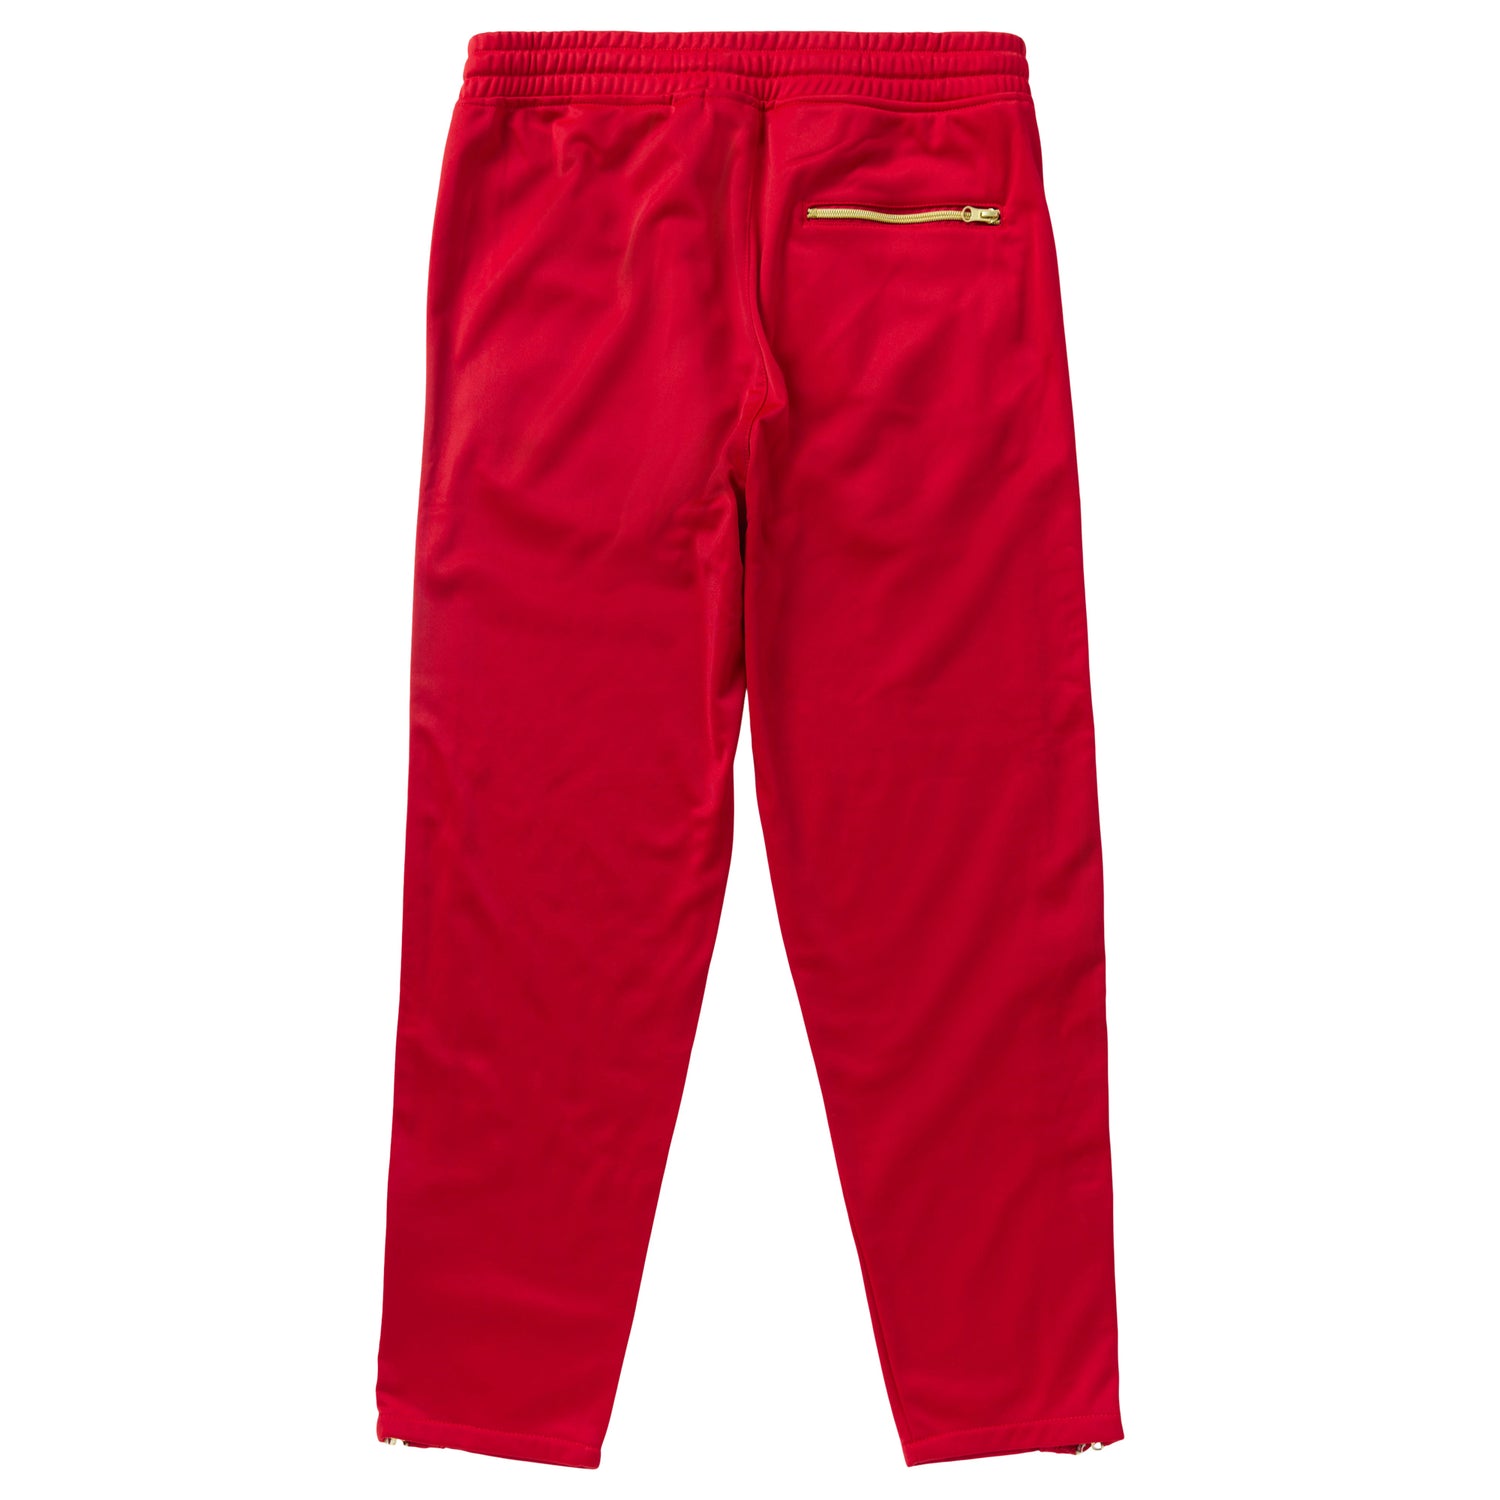 ALL GOLDEN TRACK PANT - RED